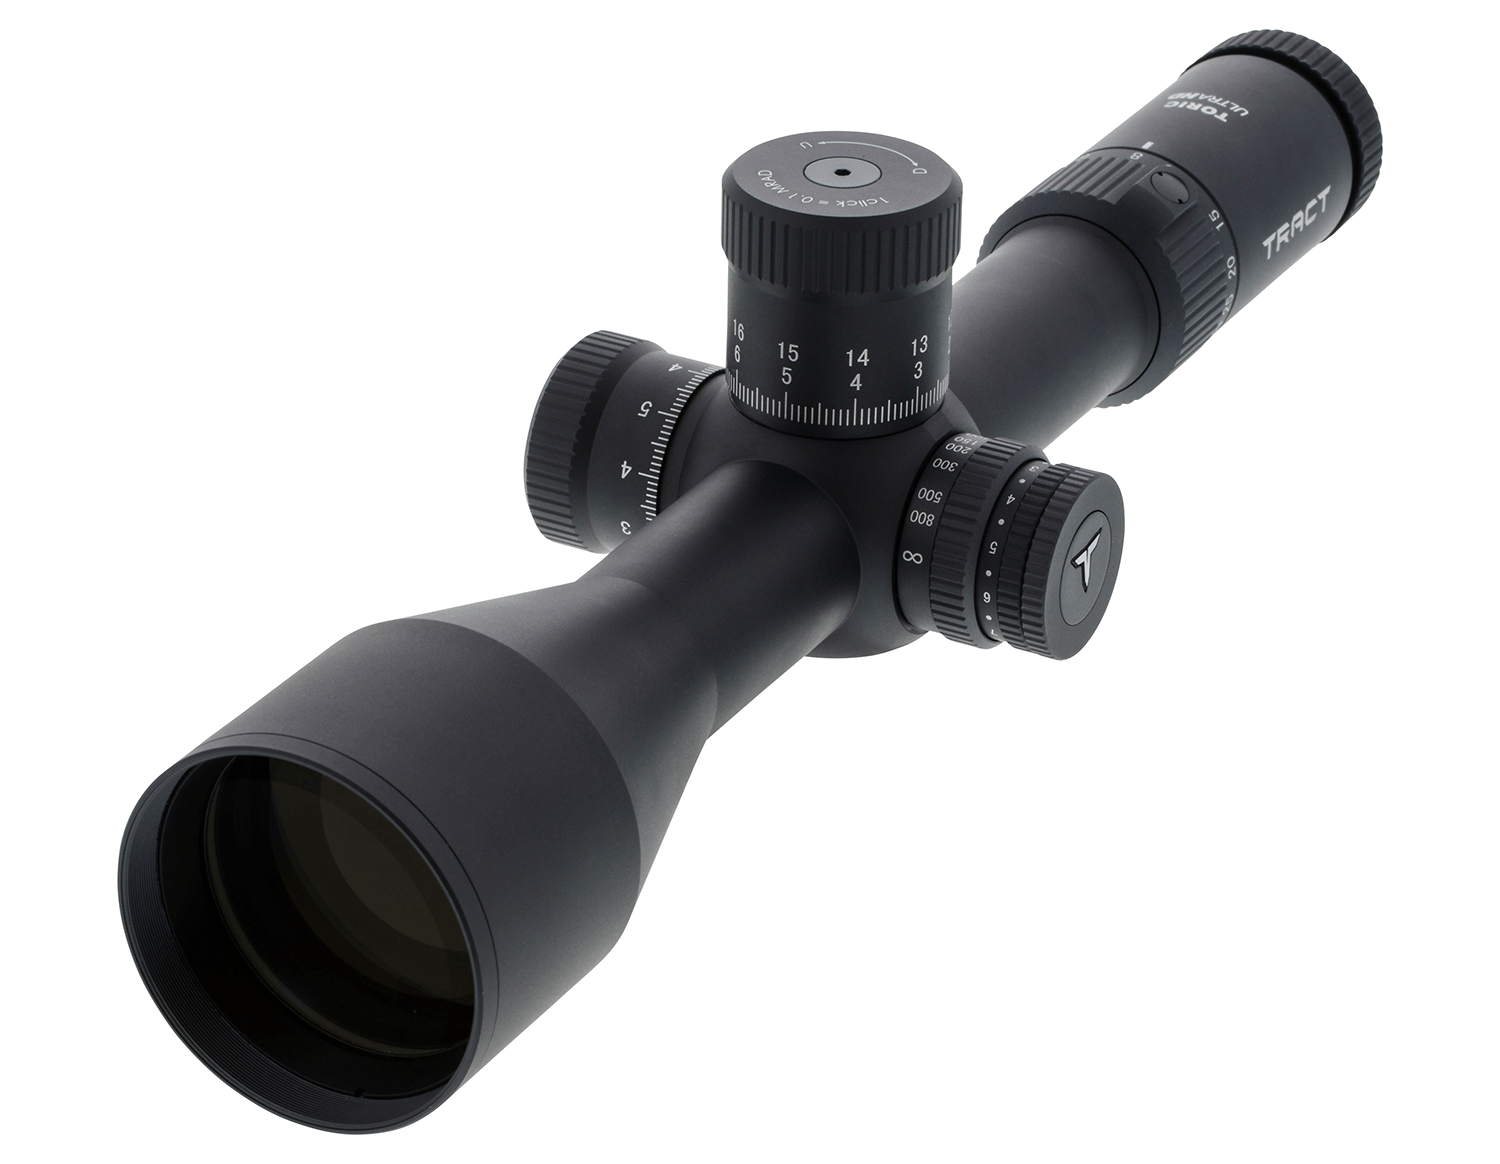 Tract Toric UHD 4.5-30x56 riflescope on a white background.